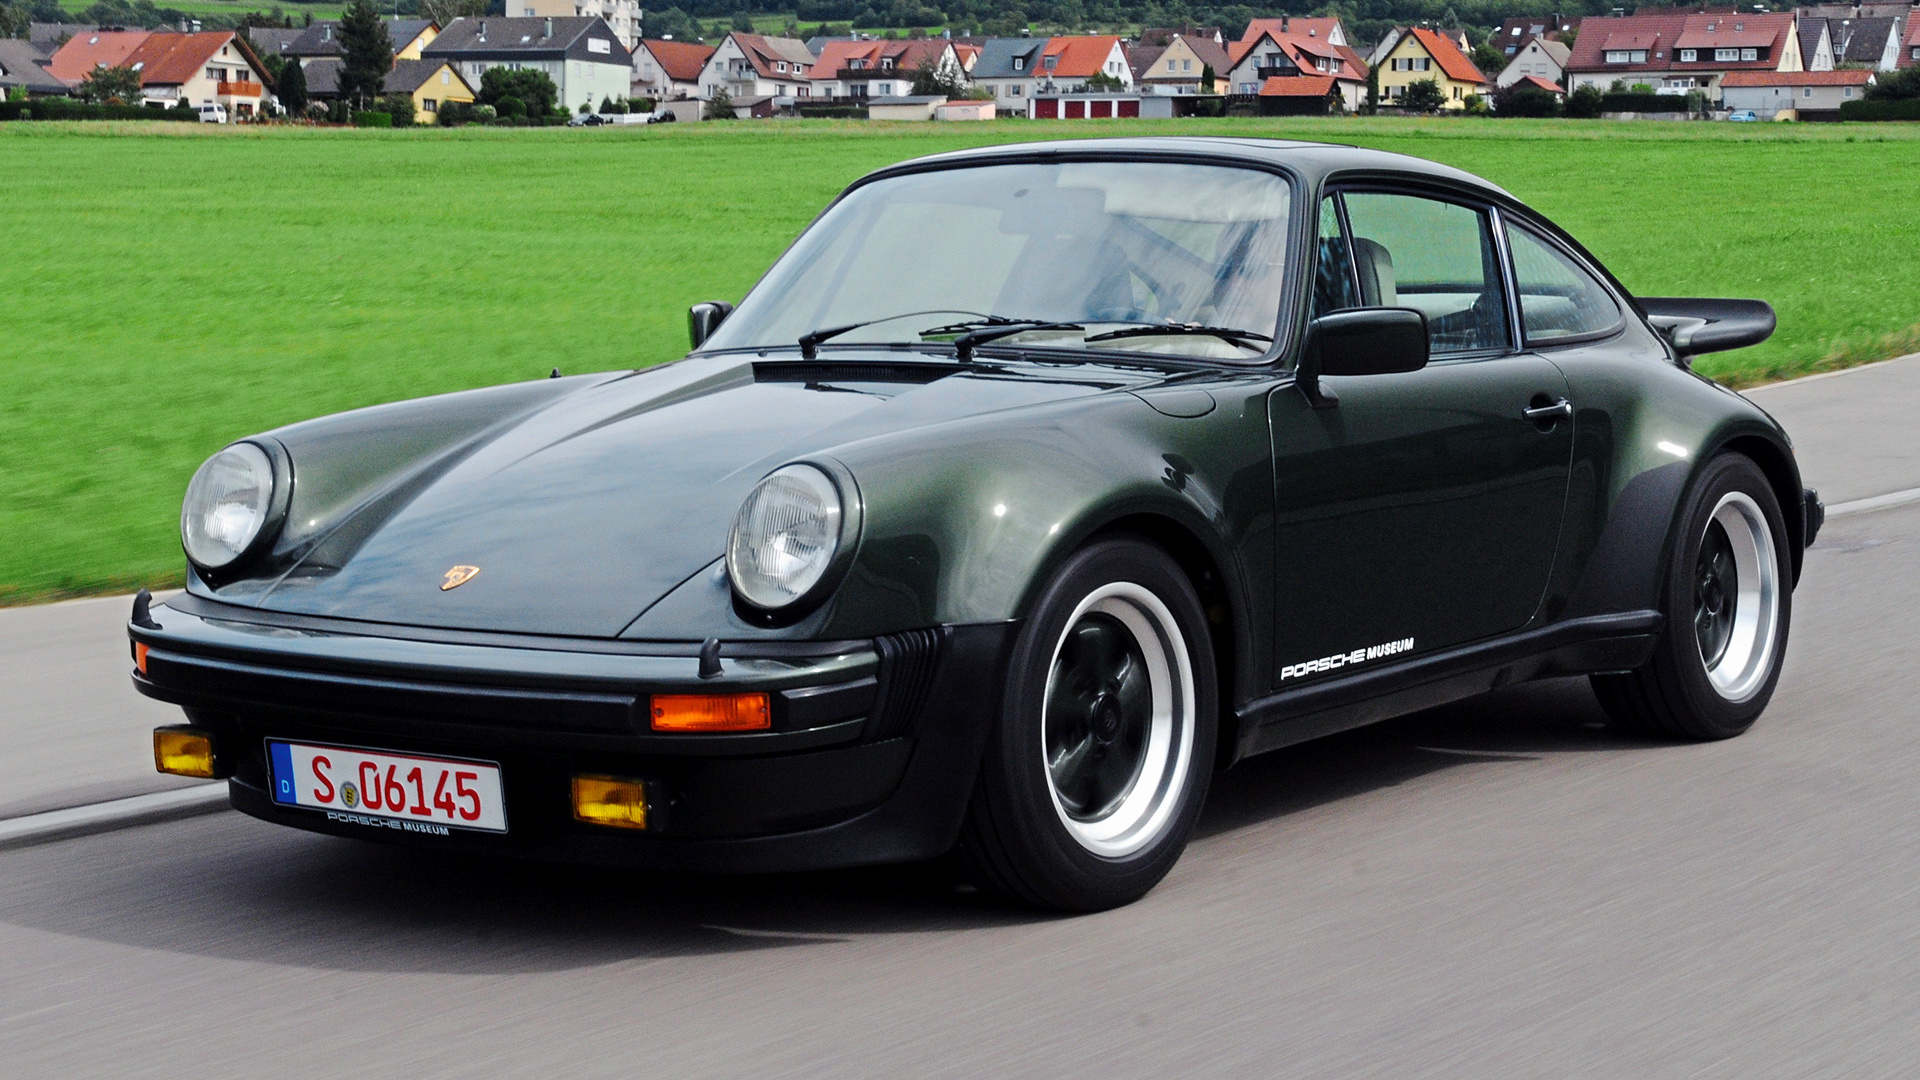 1975 Porsche 911 Turbo - Wallpapers and HD Images | Car Pixel